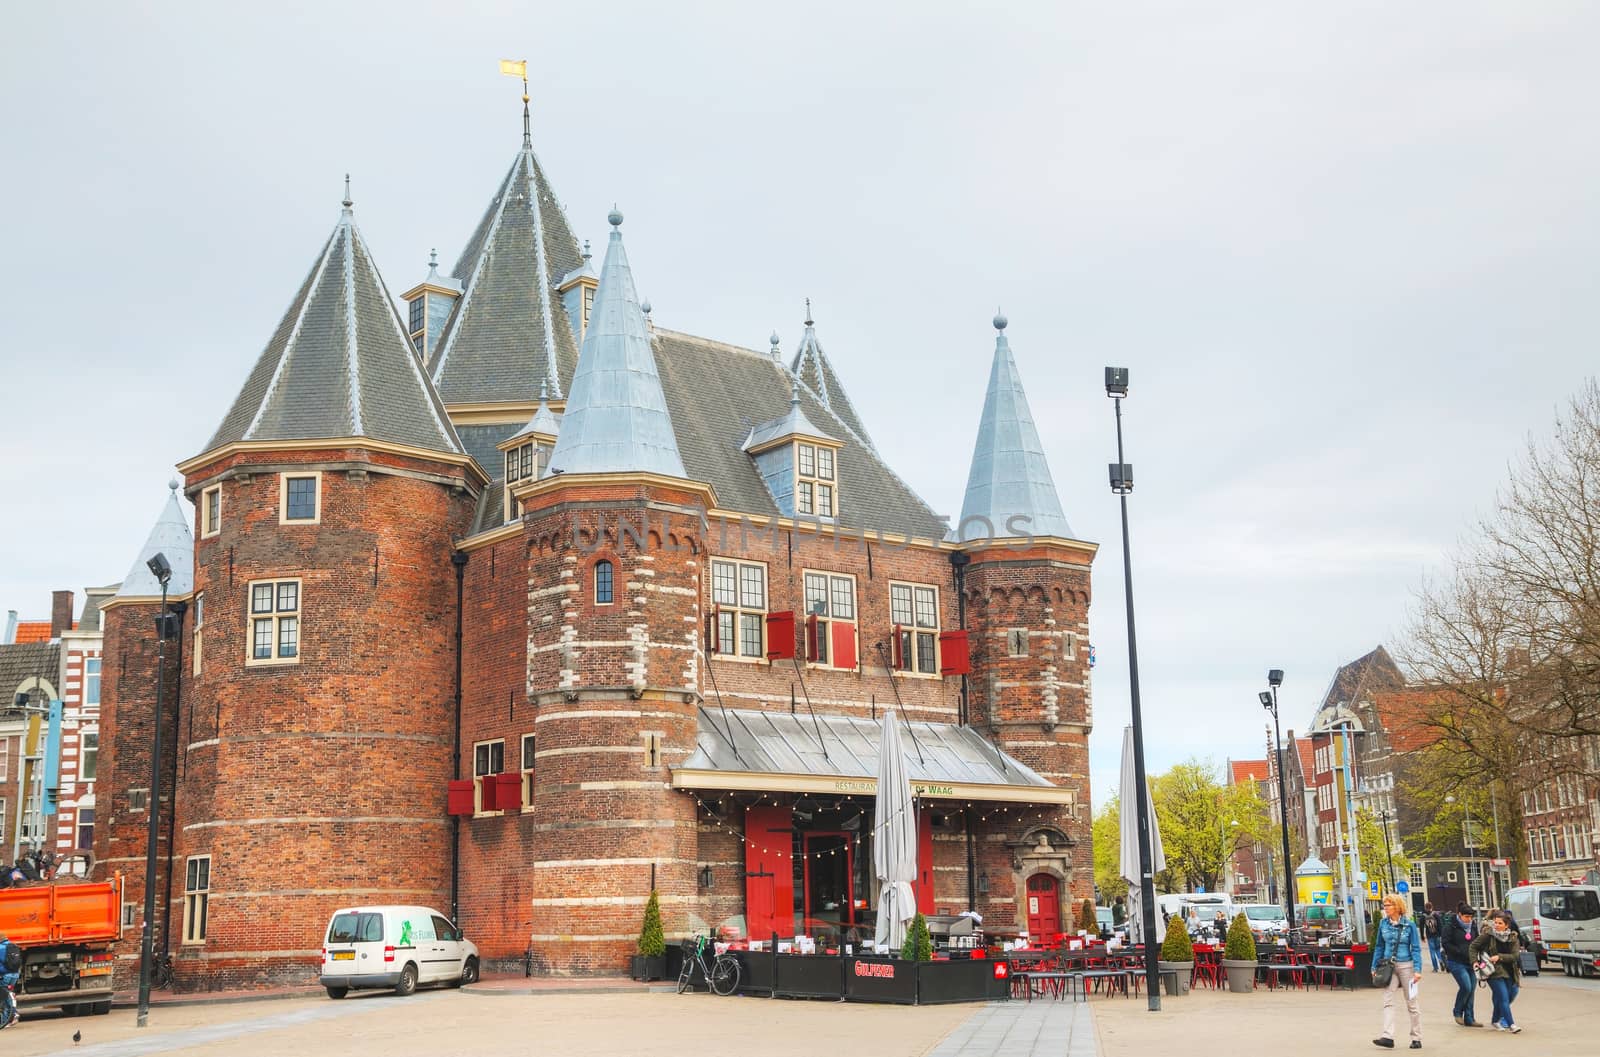 AMSTERDAM - APRIL 16: The Waag (Weigh house) on April 16, 2015 in Amsterdam, Netherlands. It's a 15th-century building on Nieuwmarkt square in Amsterdam. It was originally a city gate and part of the walls of Amsterdam.